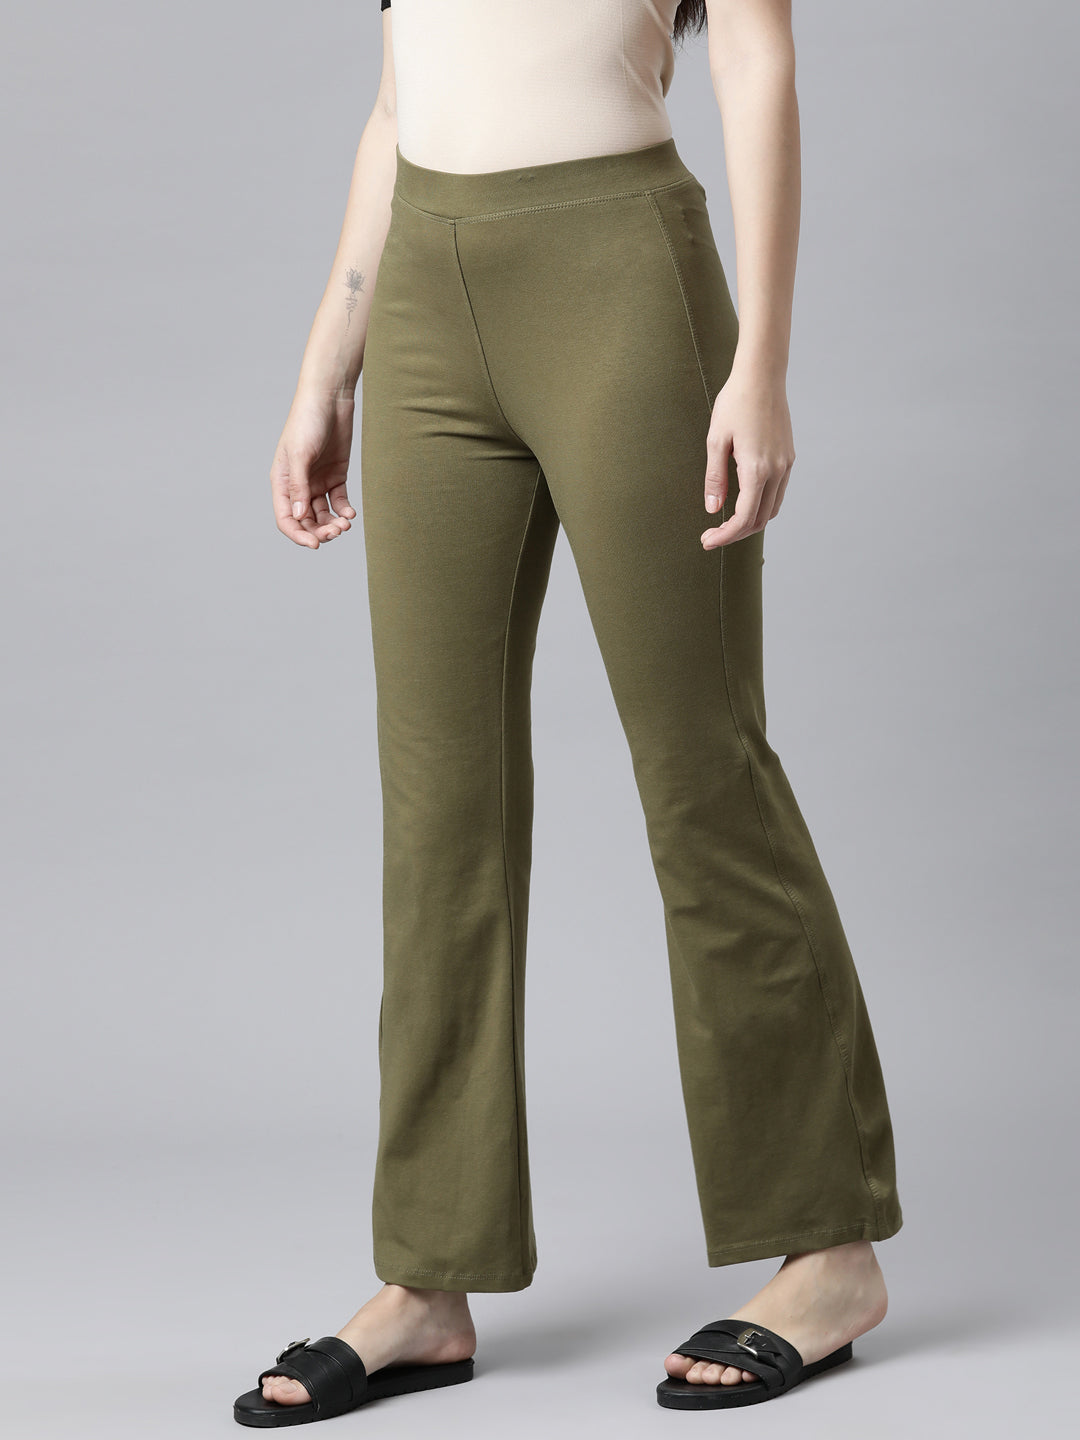 Women Solid Olive Green High Rise Flare Pants